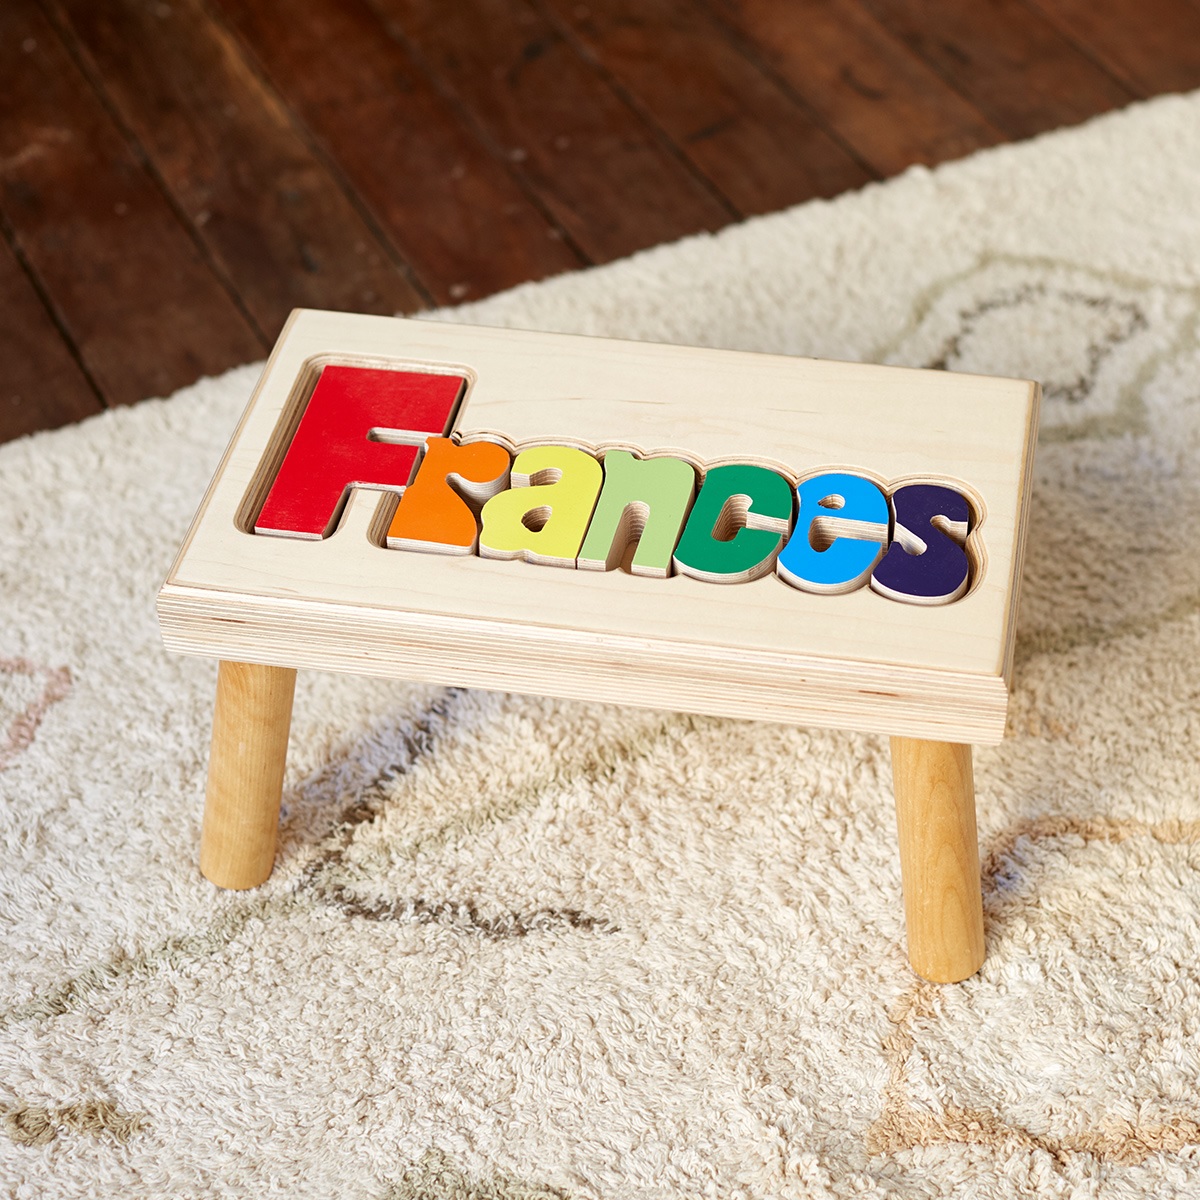 personalized step stool wooden name stool for children cute first birthday gift idea customized puzzle stool for sitting kids custom furniture colorful decor idea heirloom